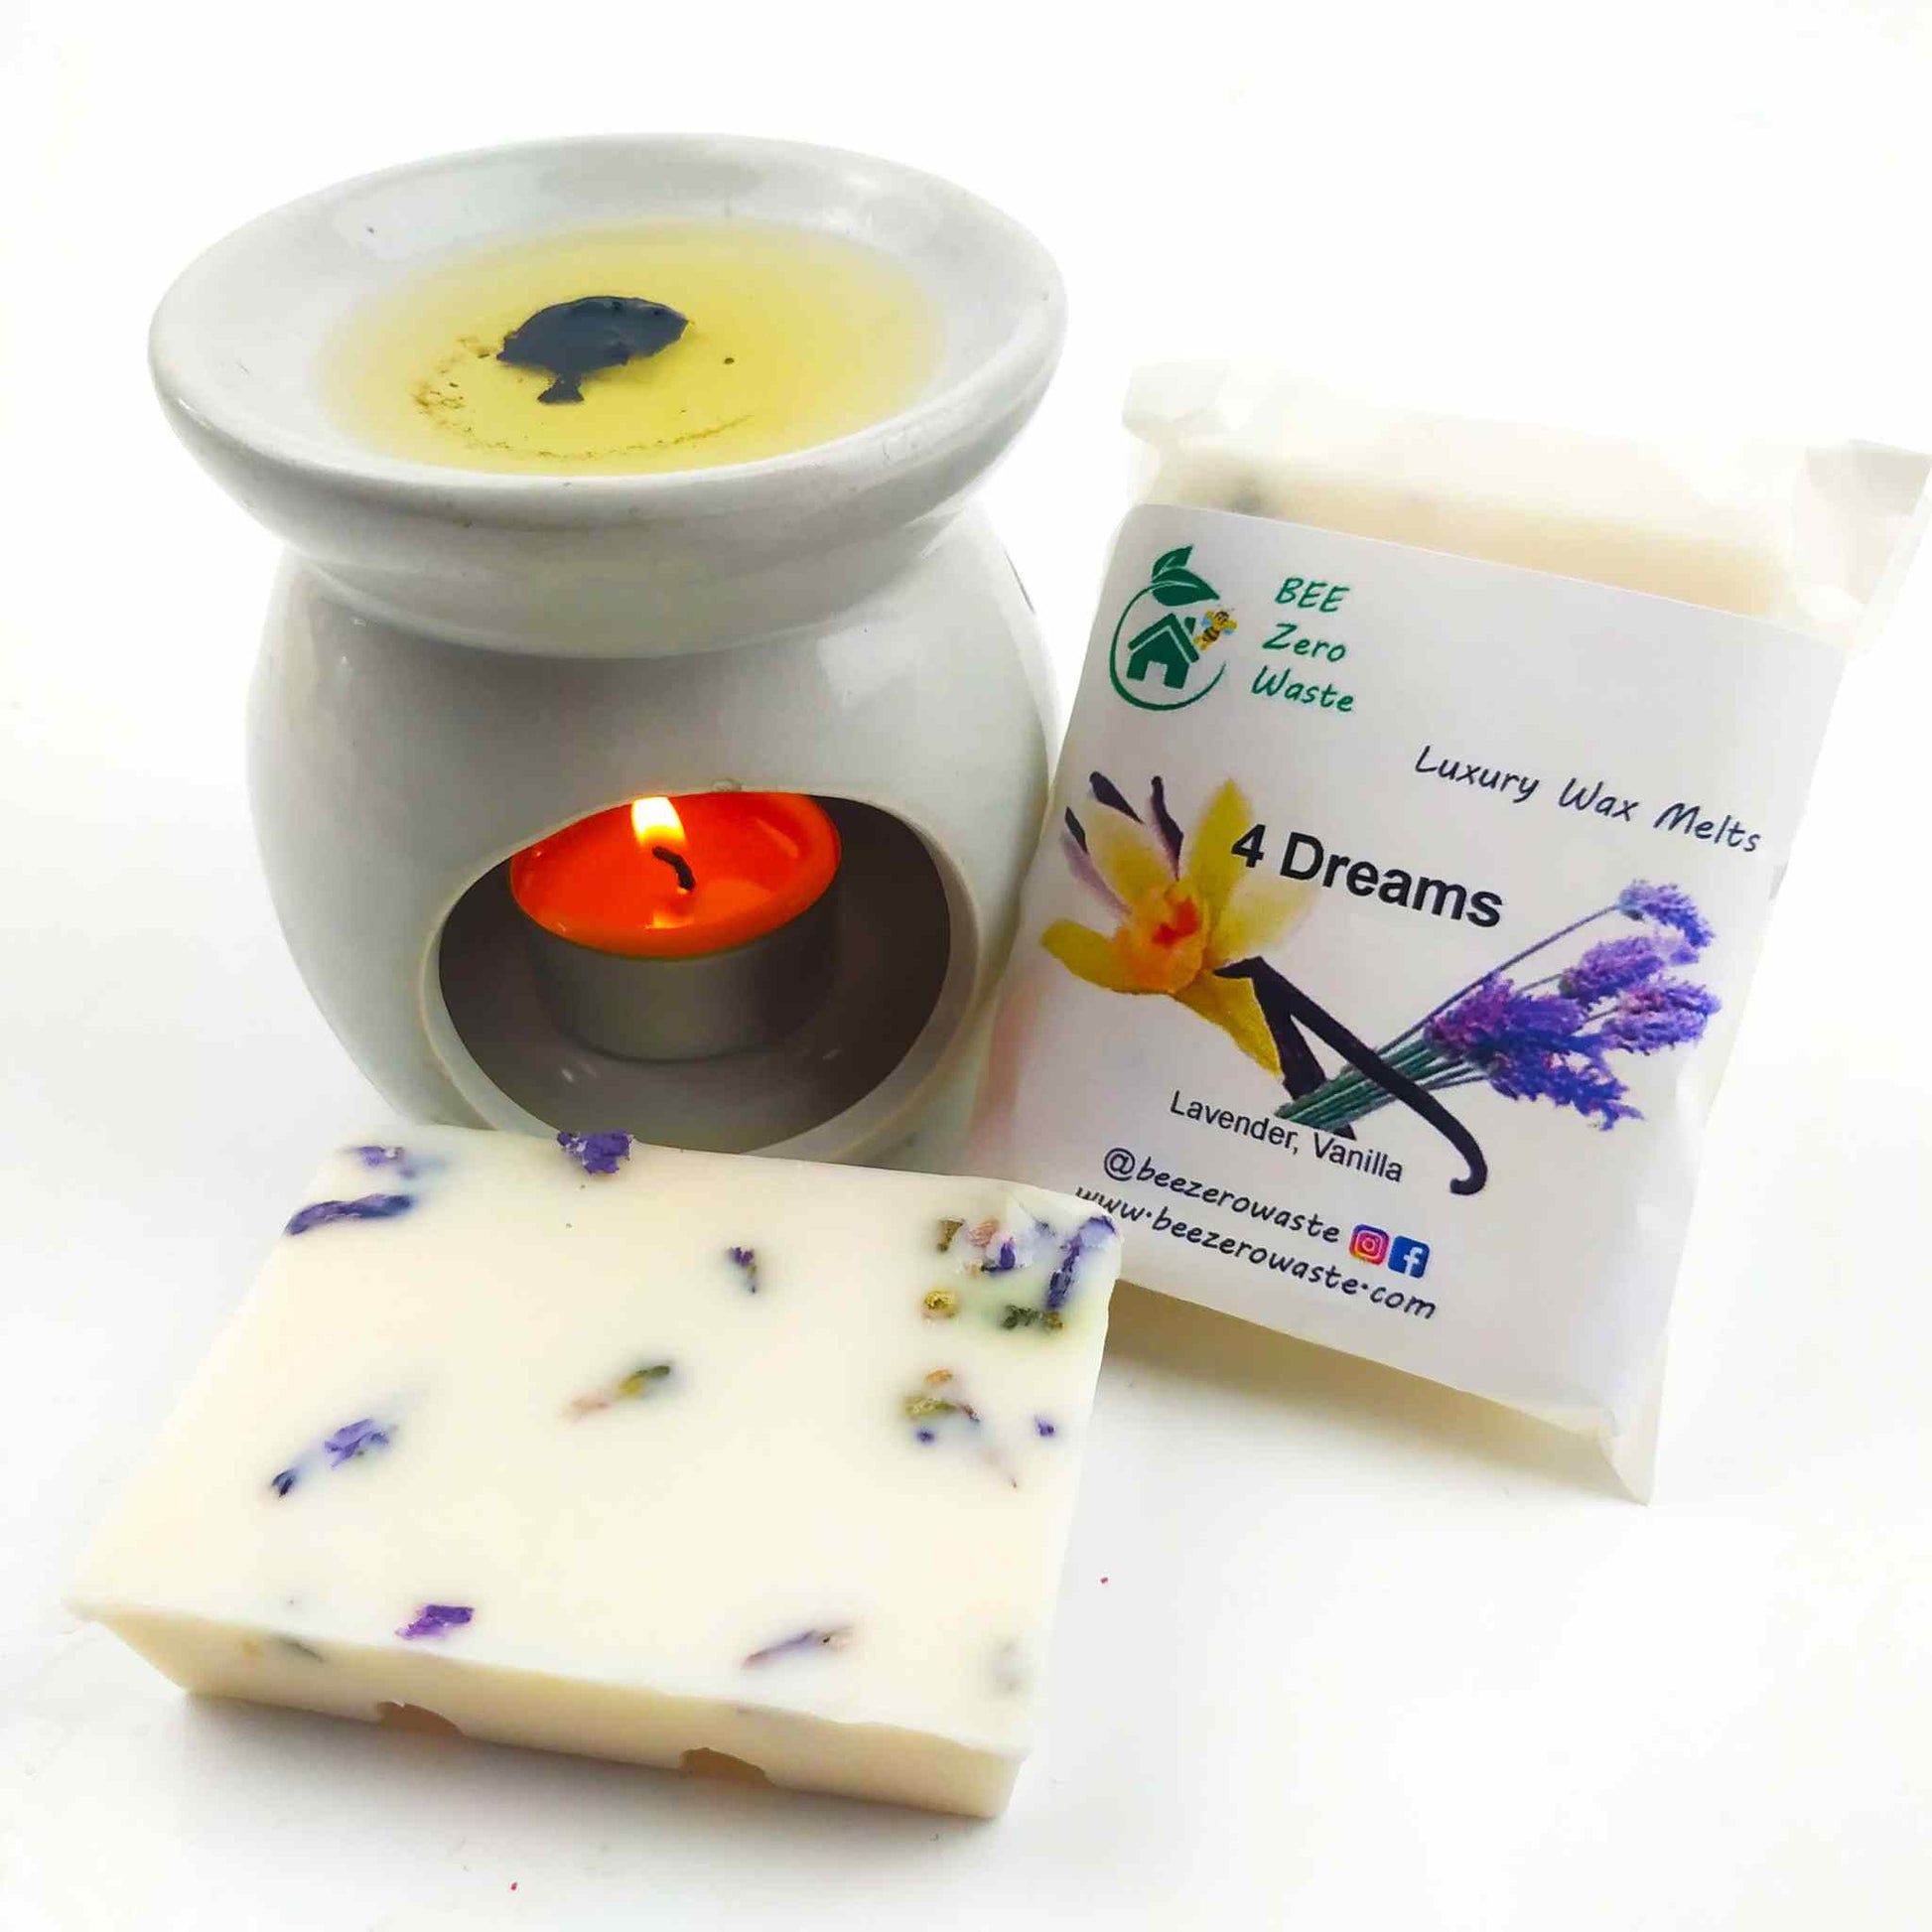 Collection of eco-friendly soy wax melts, showcasing vegan and toxin-free ingredients, perfect for safe home fragrancing